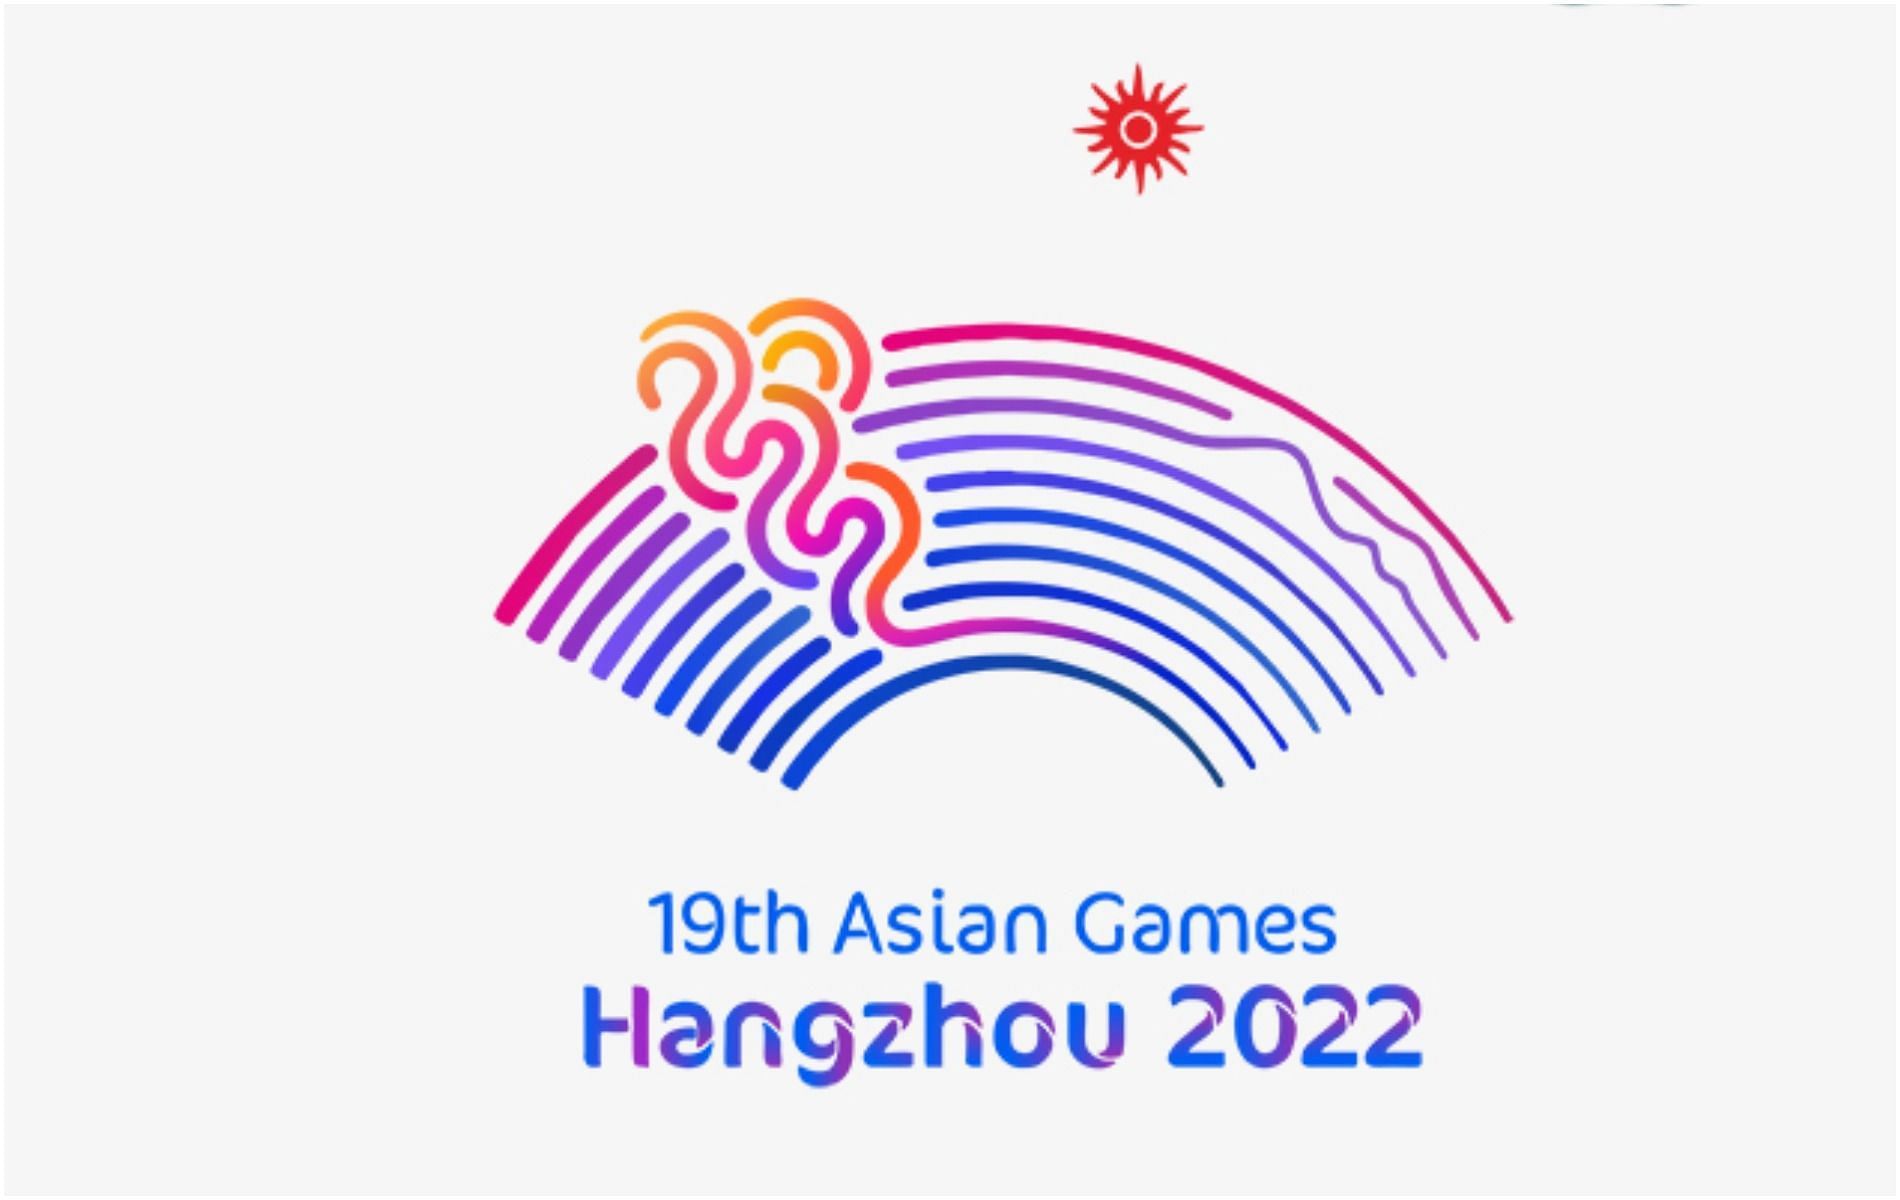 India has the potential to make it large (Image via Asian Games Organizing Committee)